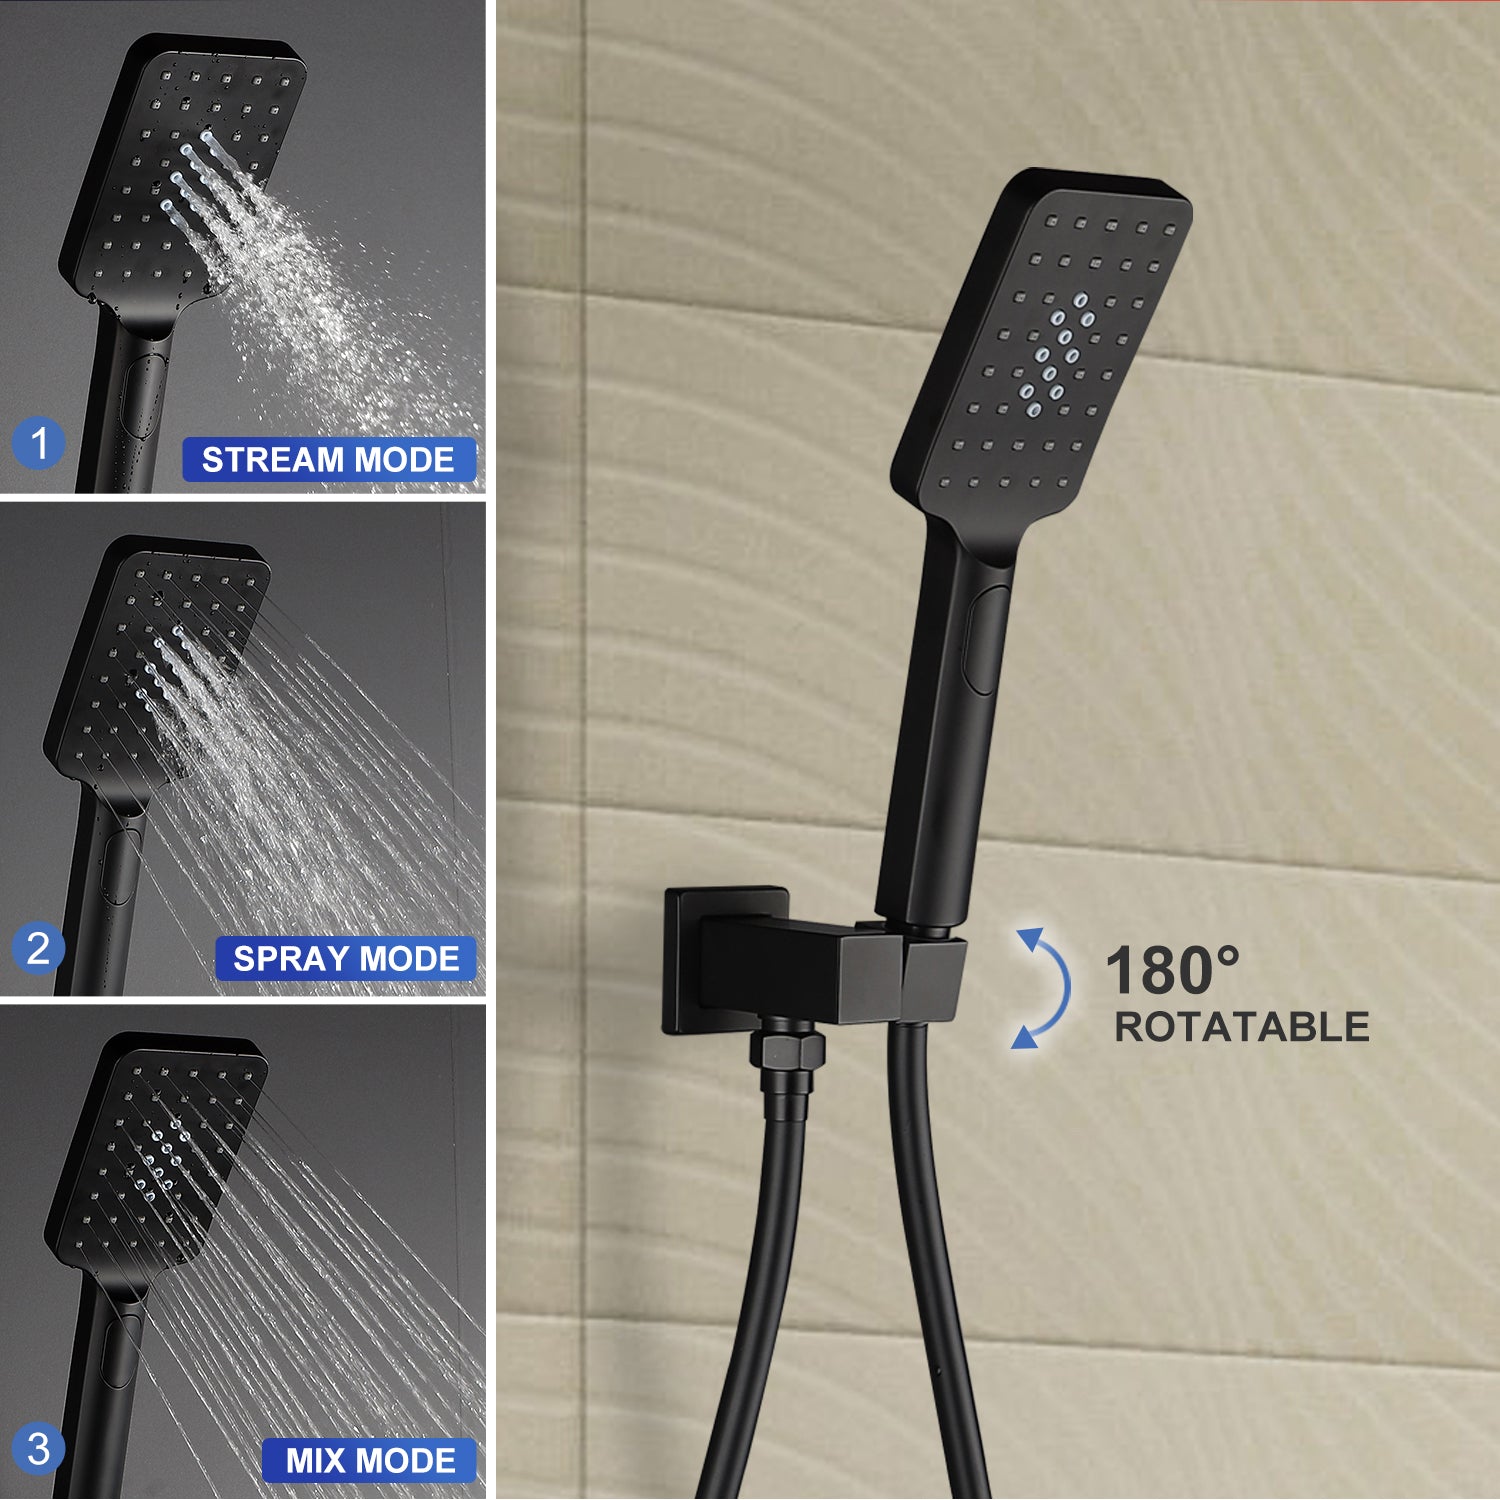 【Rainlex RX98105-12】12" Shower Head  Dual Functions Ceiling-Mount  Balance Square Square Shower Faucet(Rough-in Valve Included)